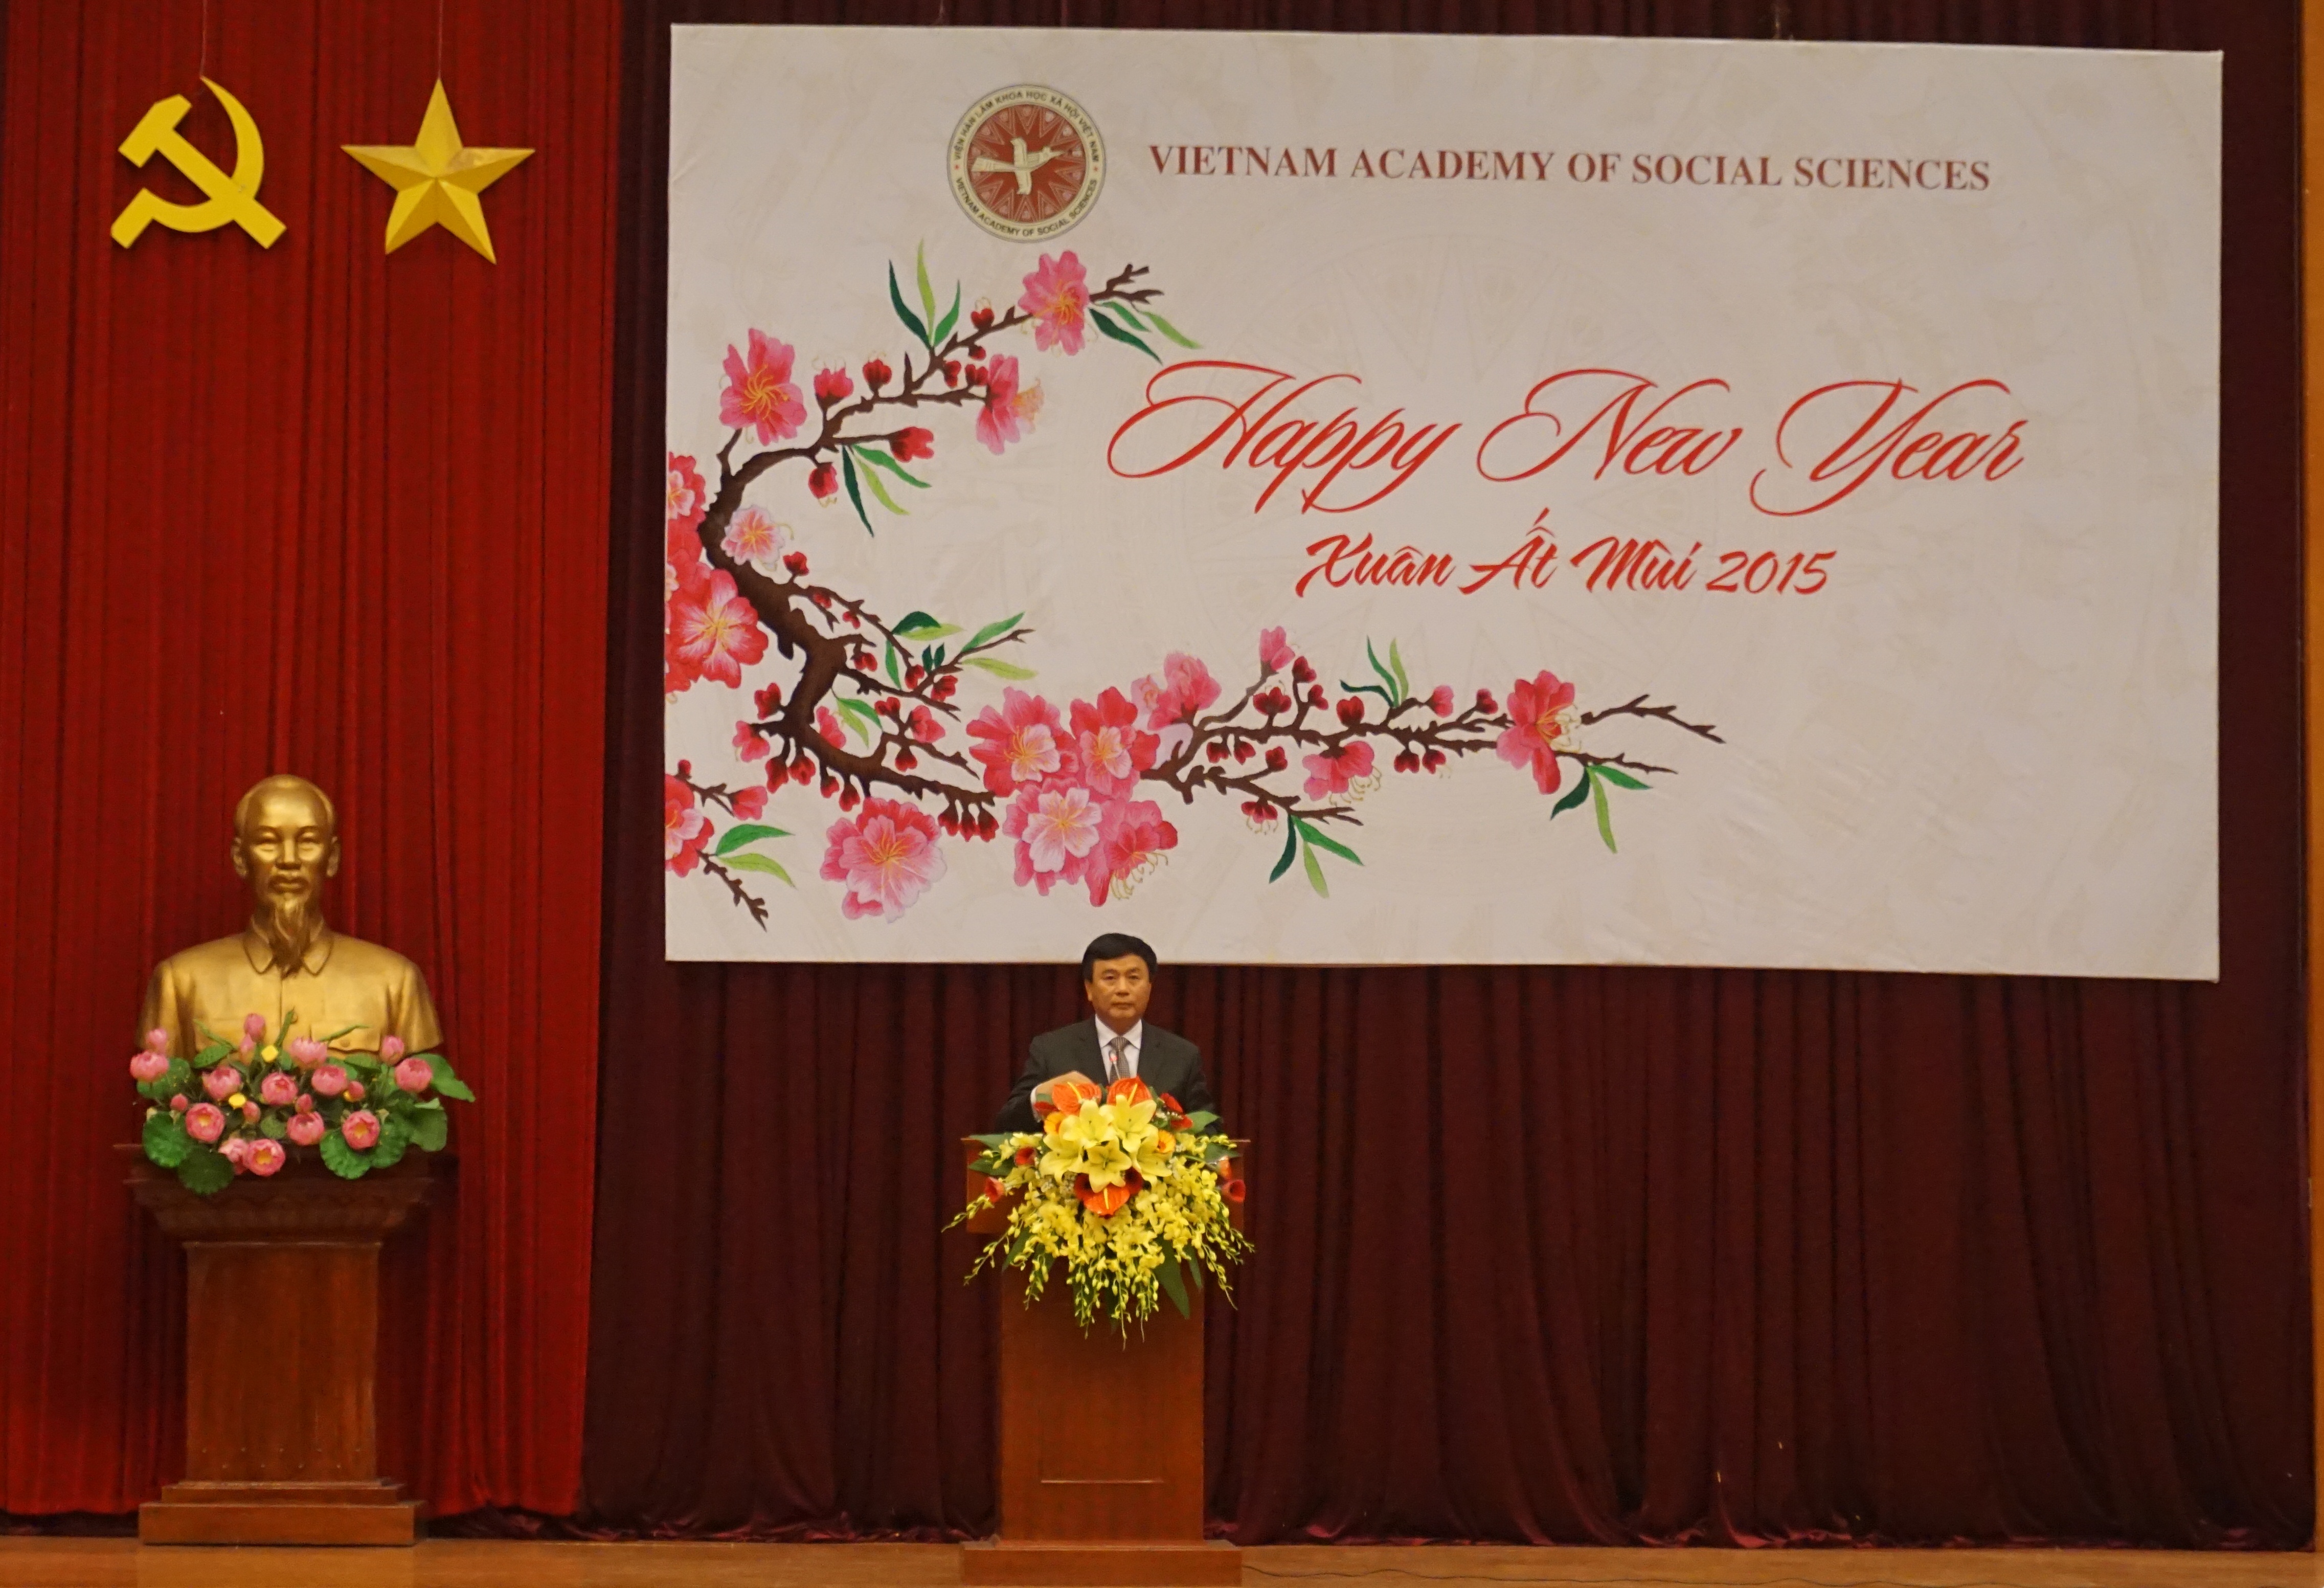 Prof. Dr. Nguyen Xuan Thang, President of Vietnam Academy of Social Sciences was delivering an opening speech.